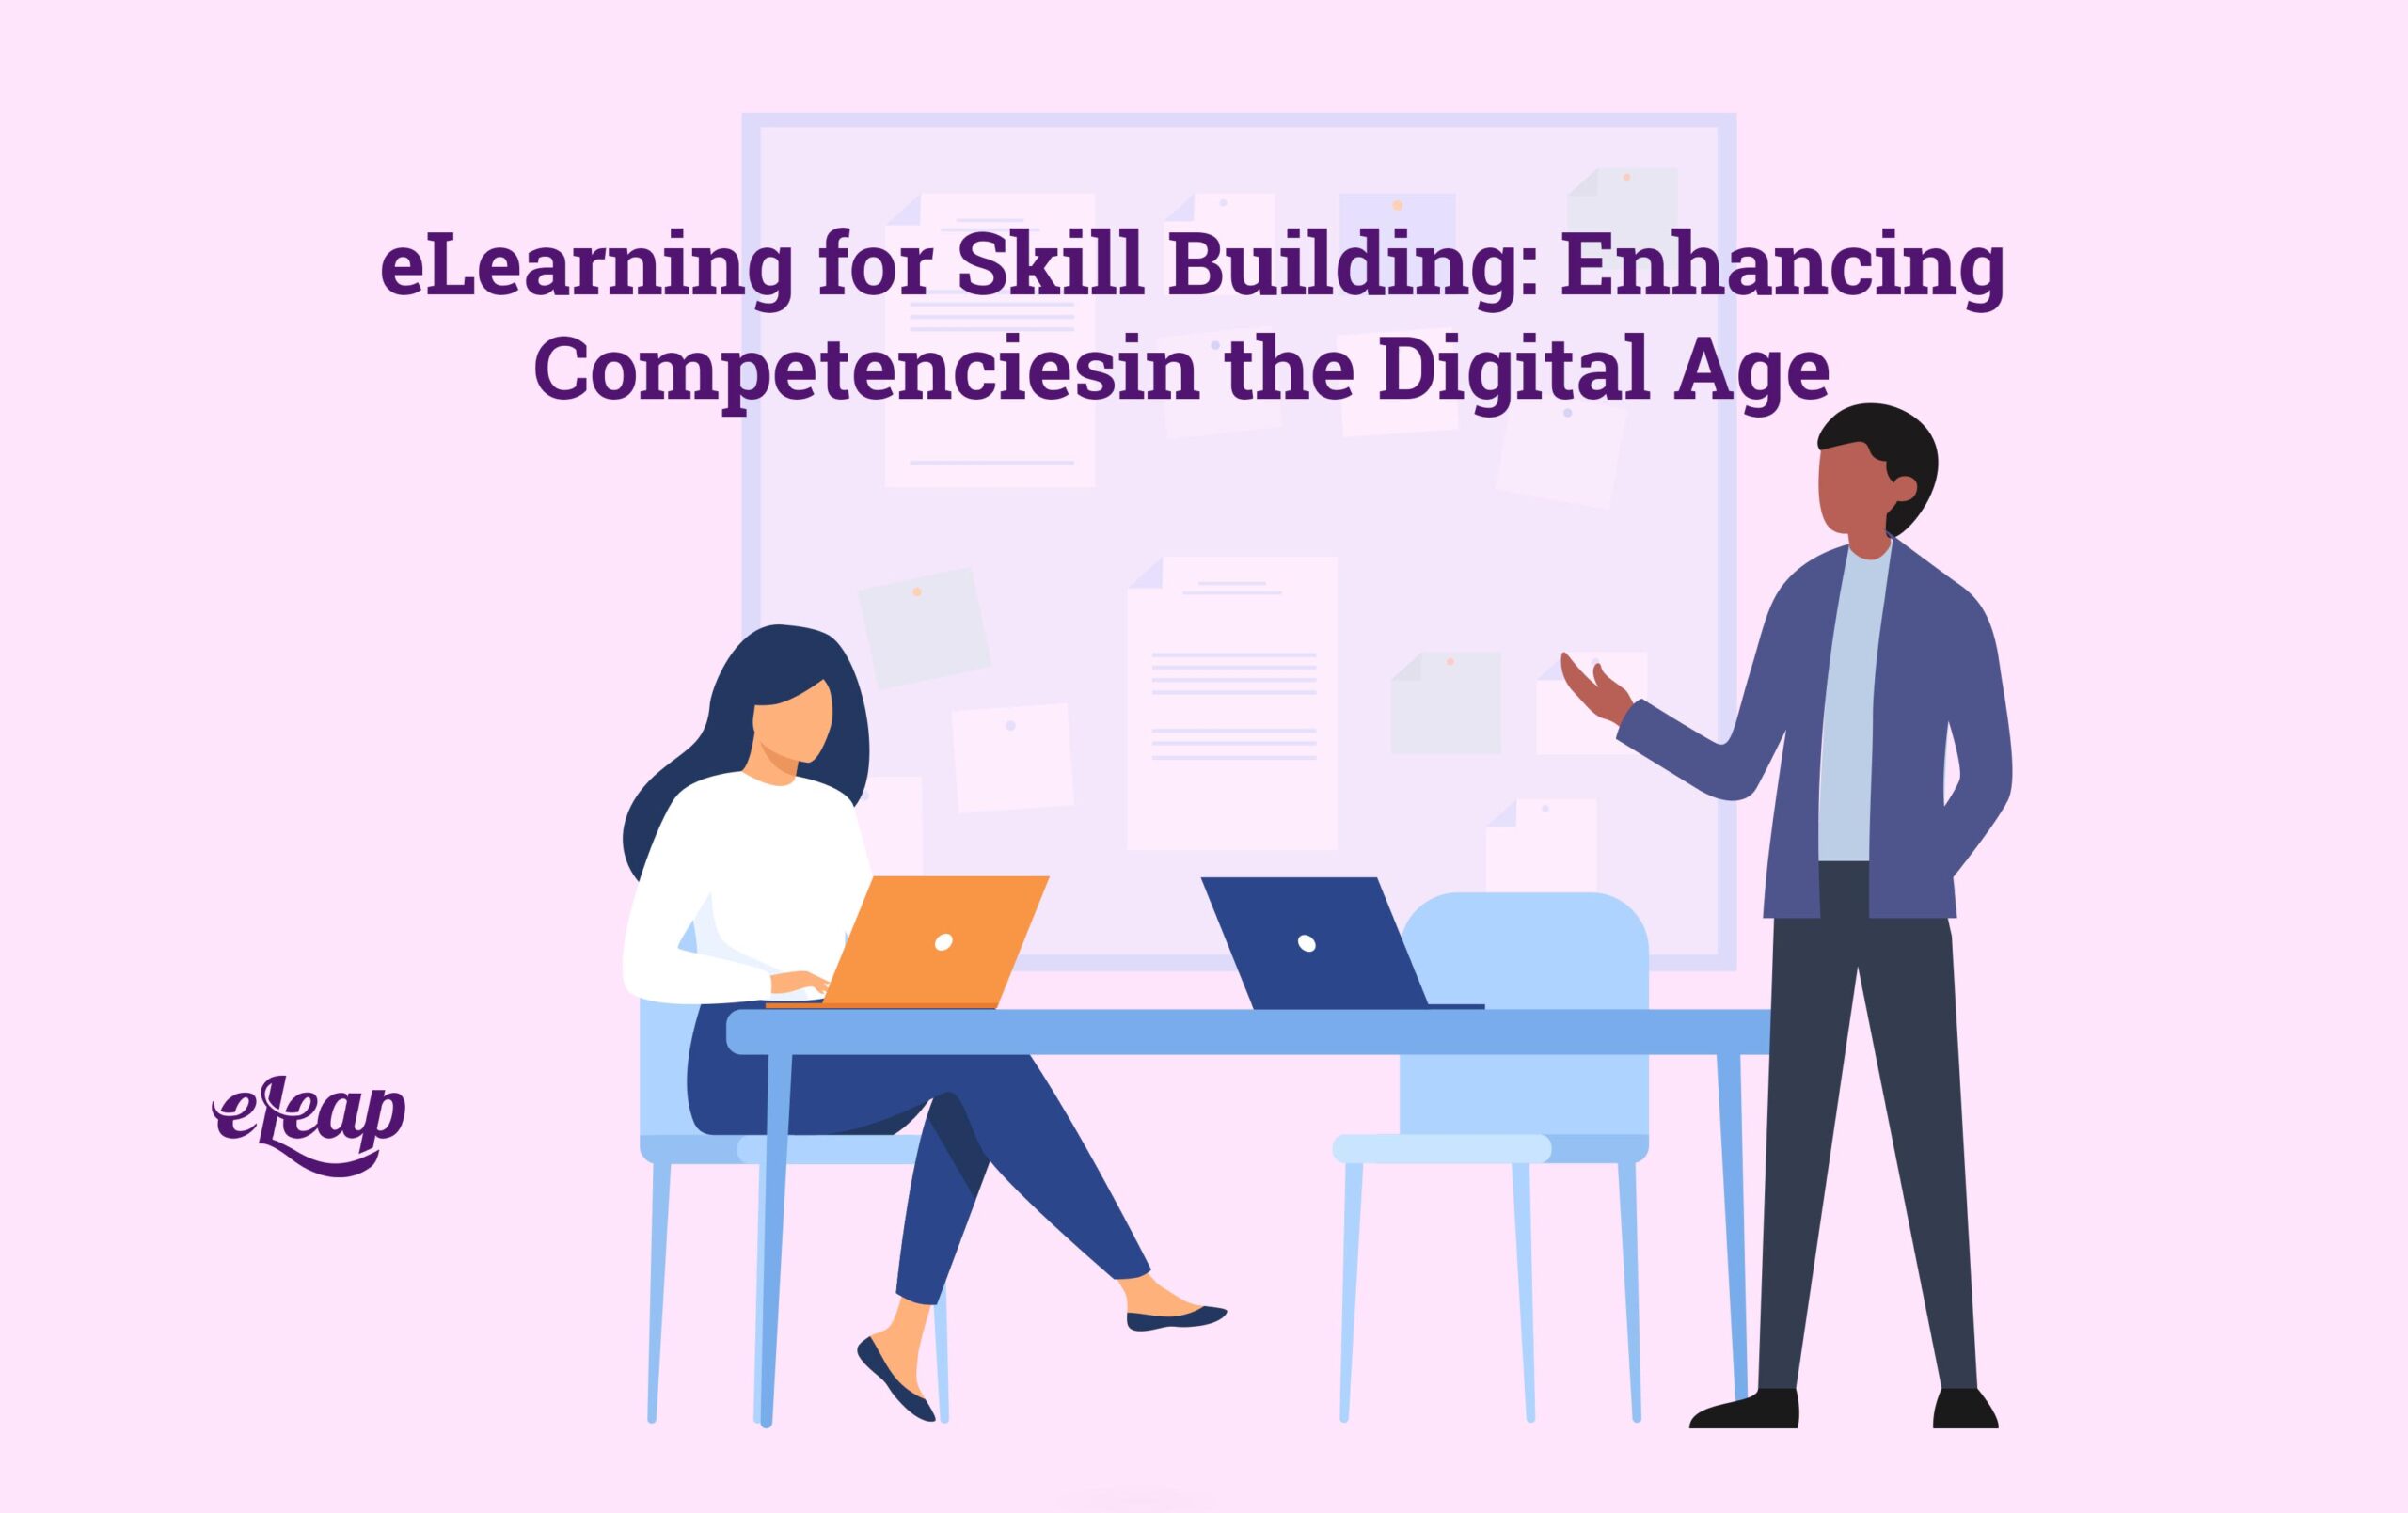 eLearning for Skill Building